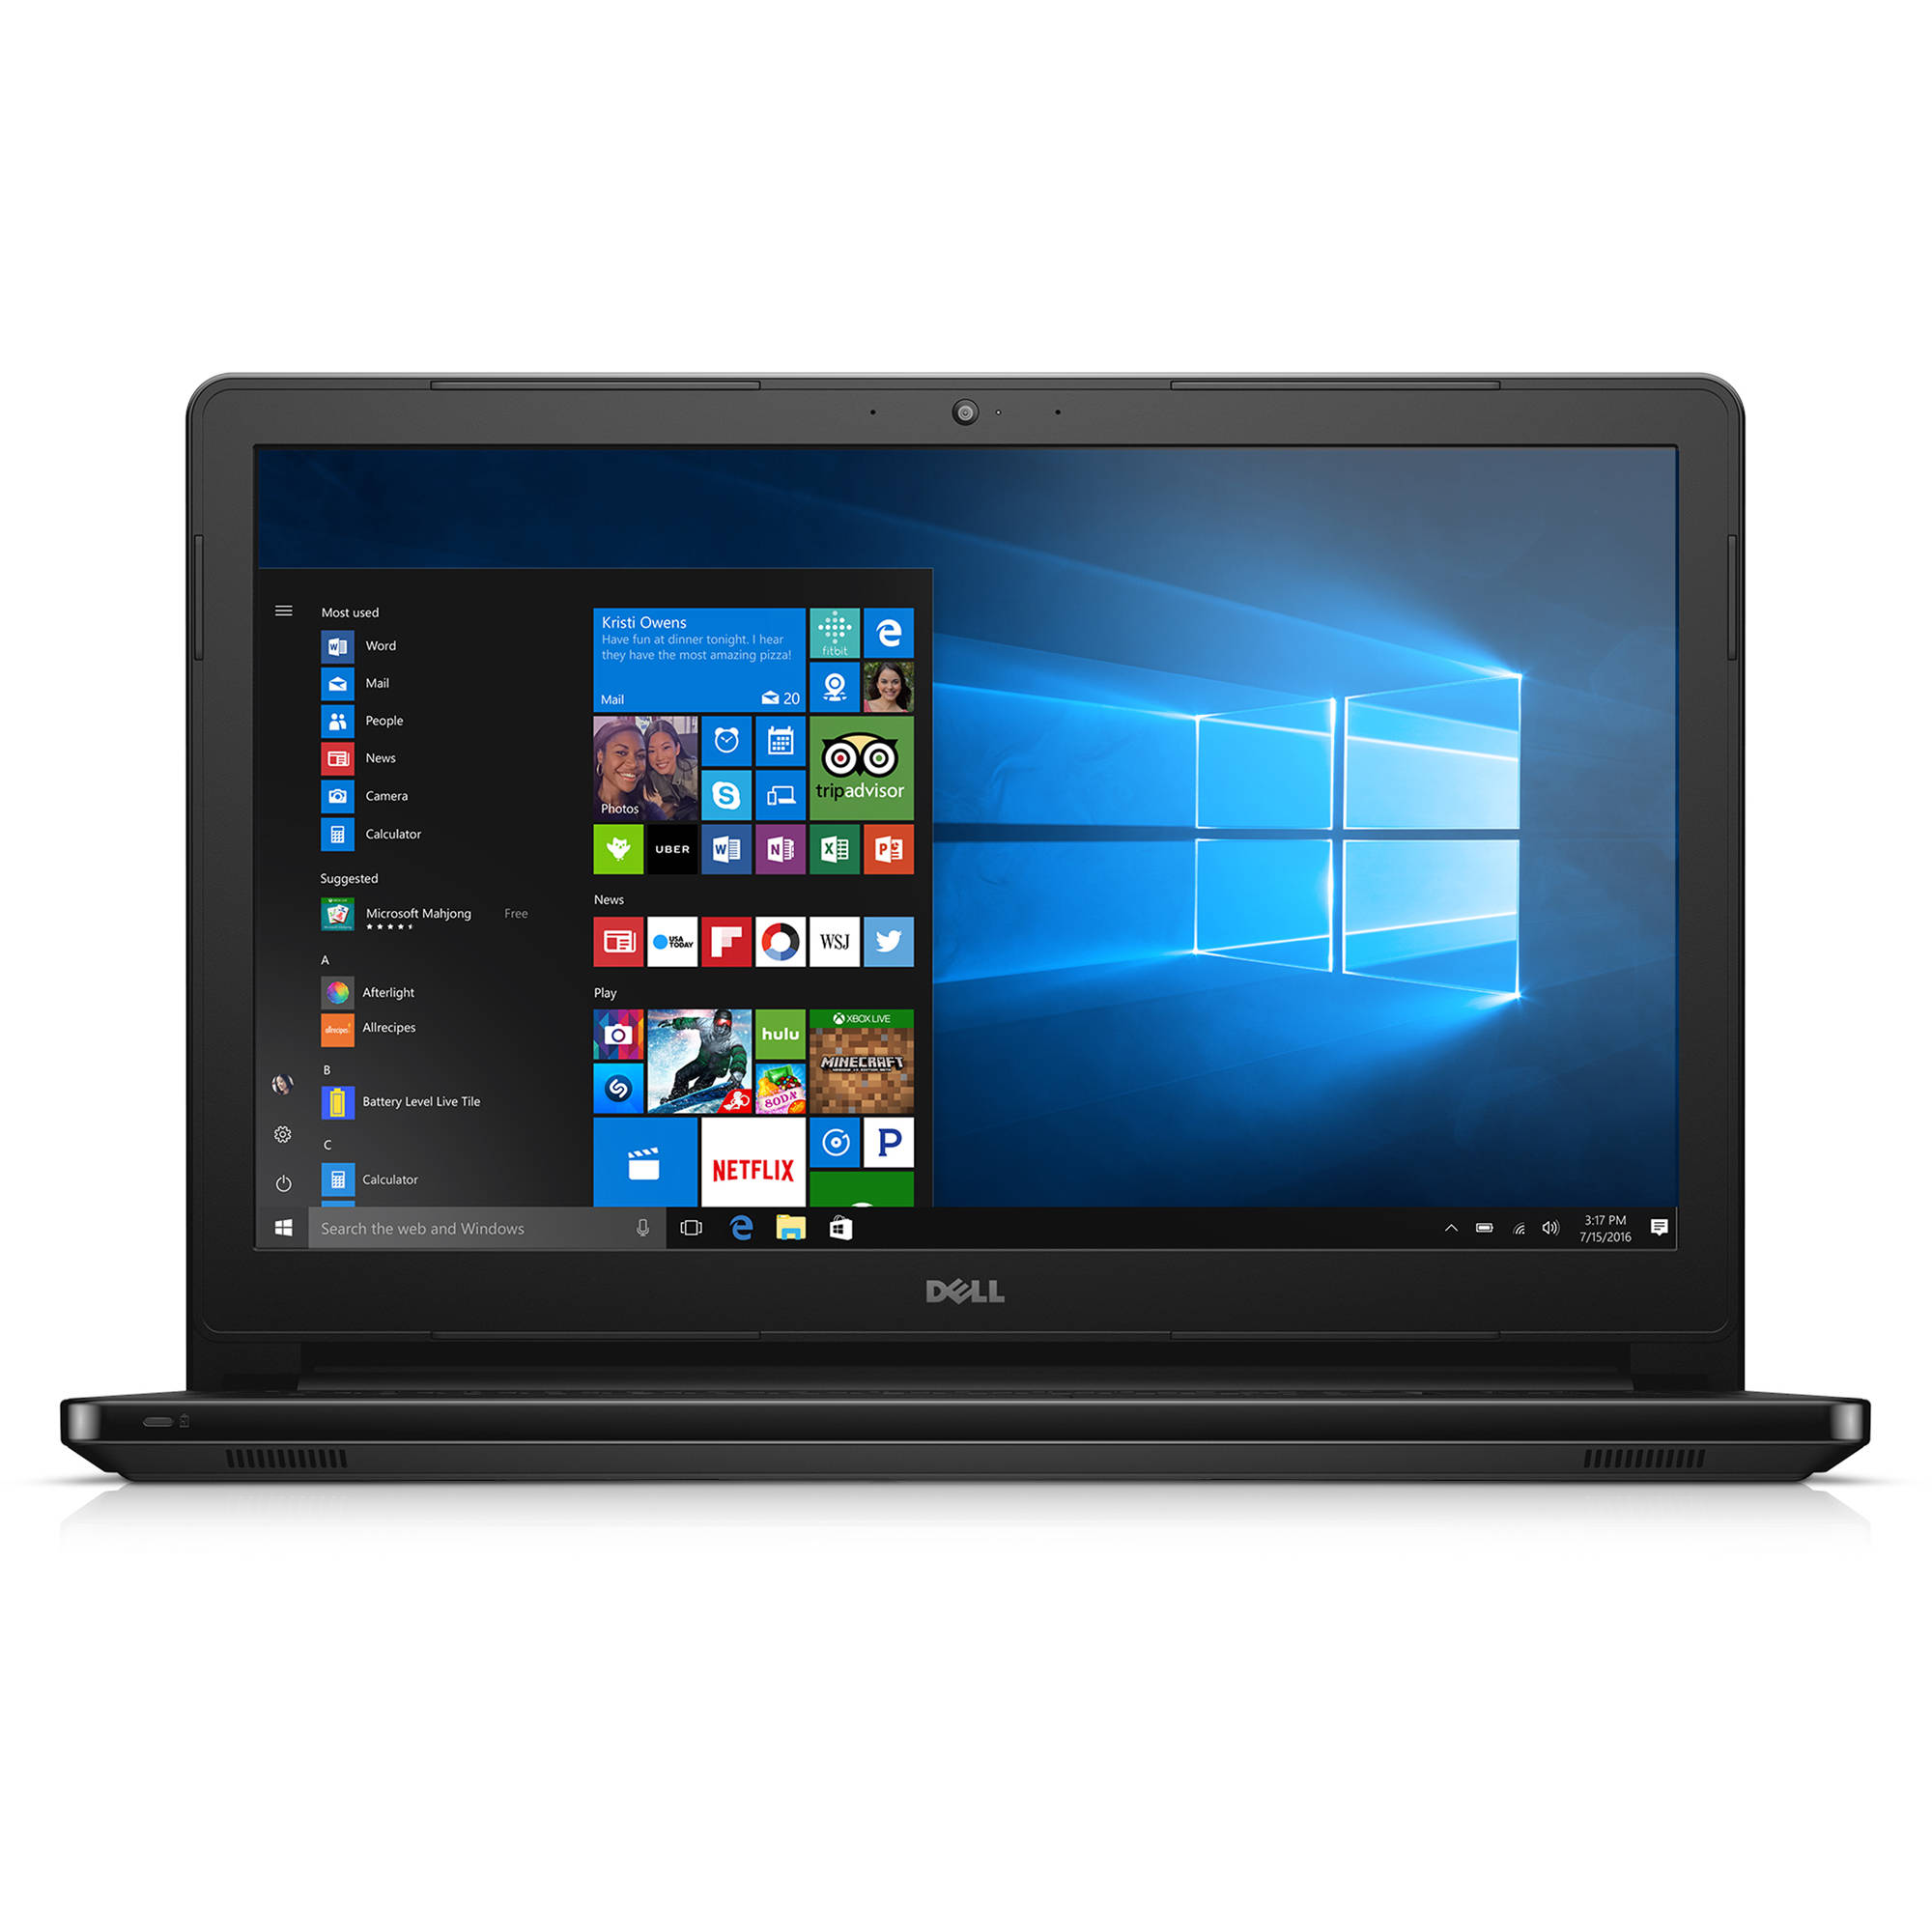 Dell Inspiron 15 5552 Notebook